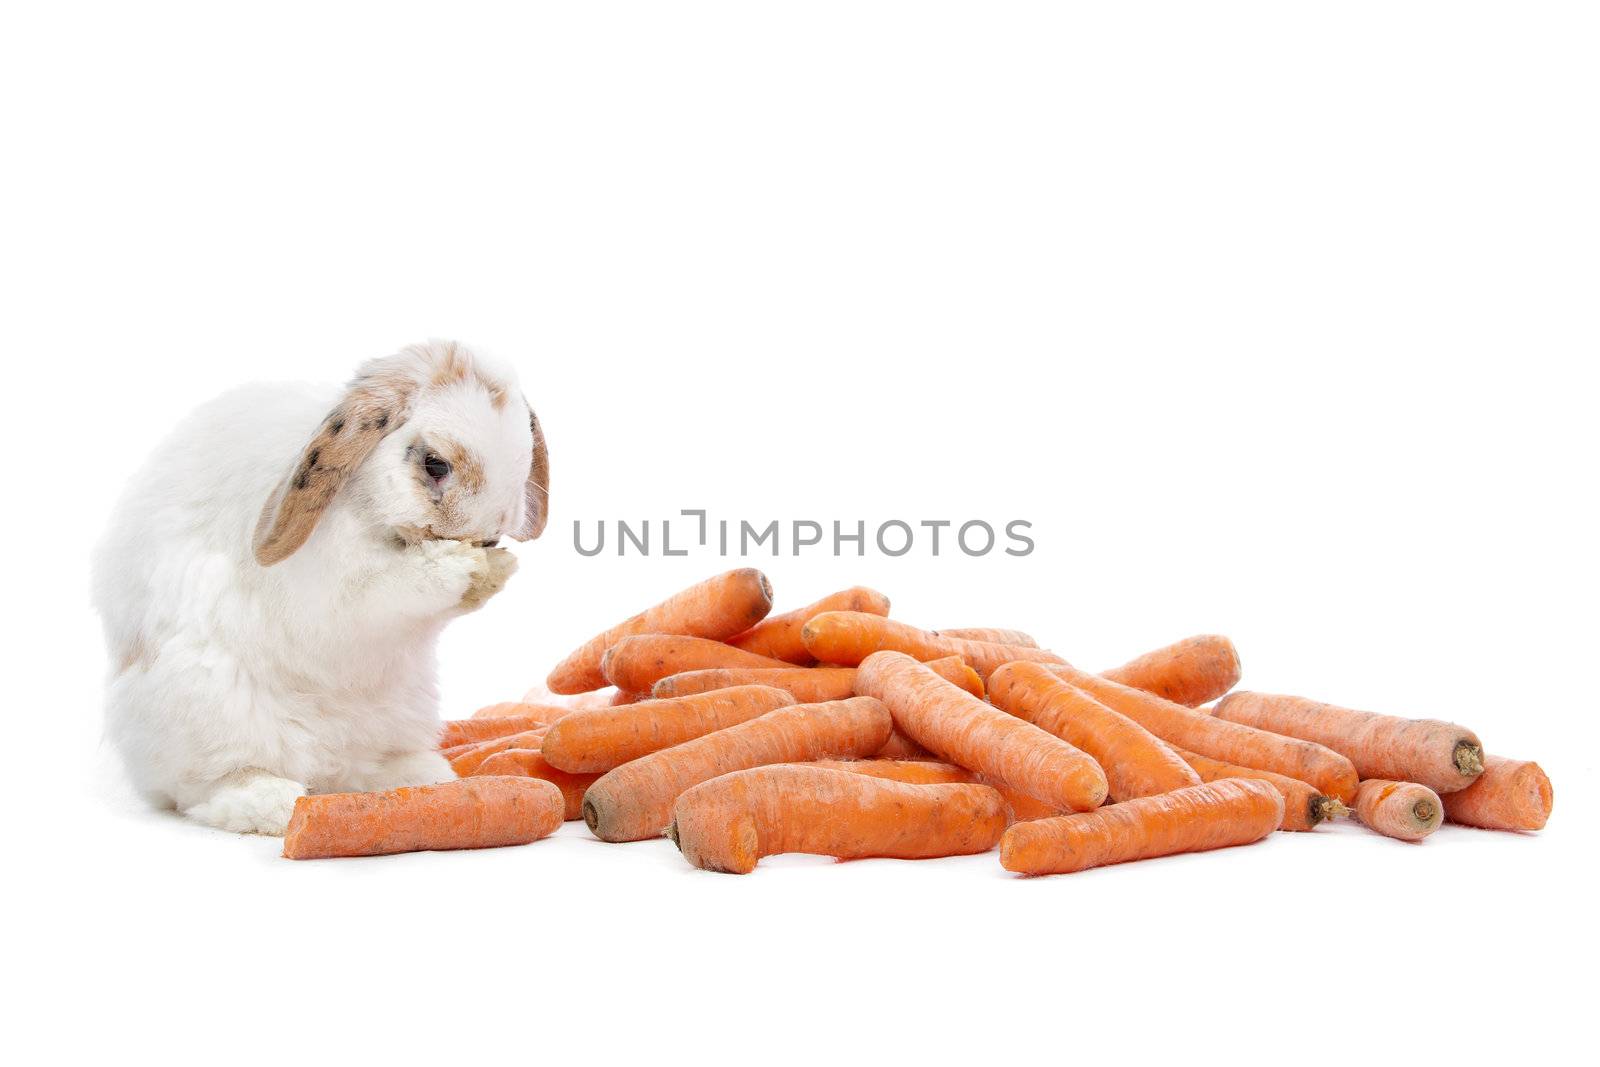 Rabbit eating from a pile of carrots in front of white background